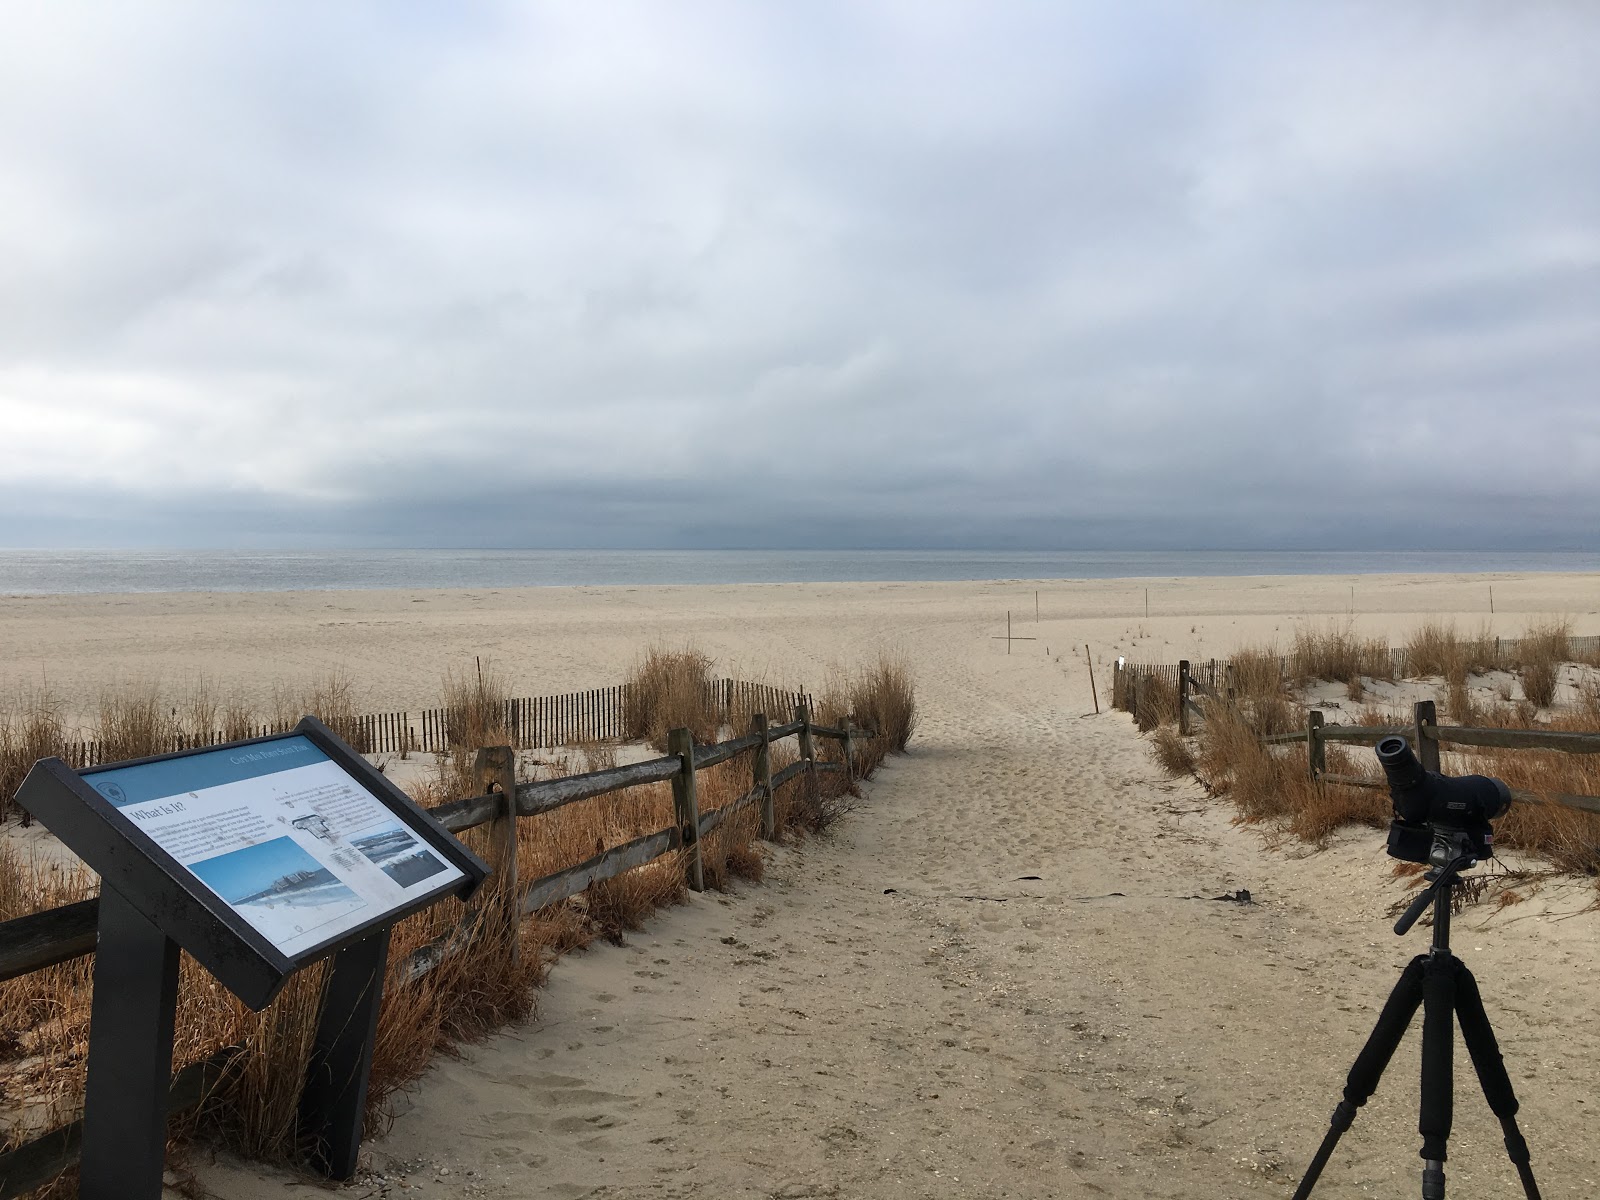 A landscape view of Cape May Point State Park showing a placard with a description of the area, an open field, and the sky.